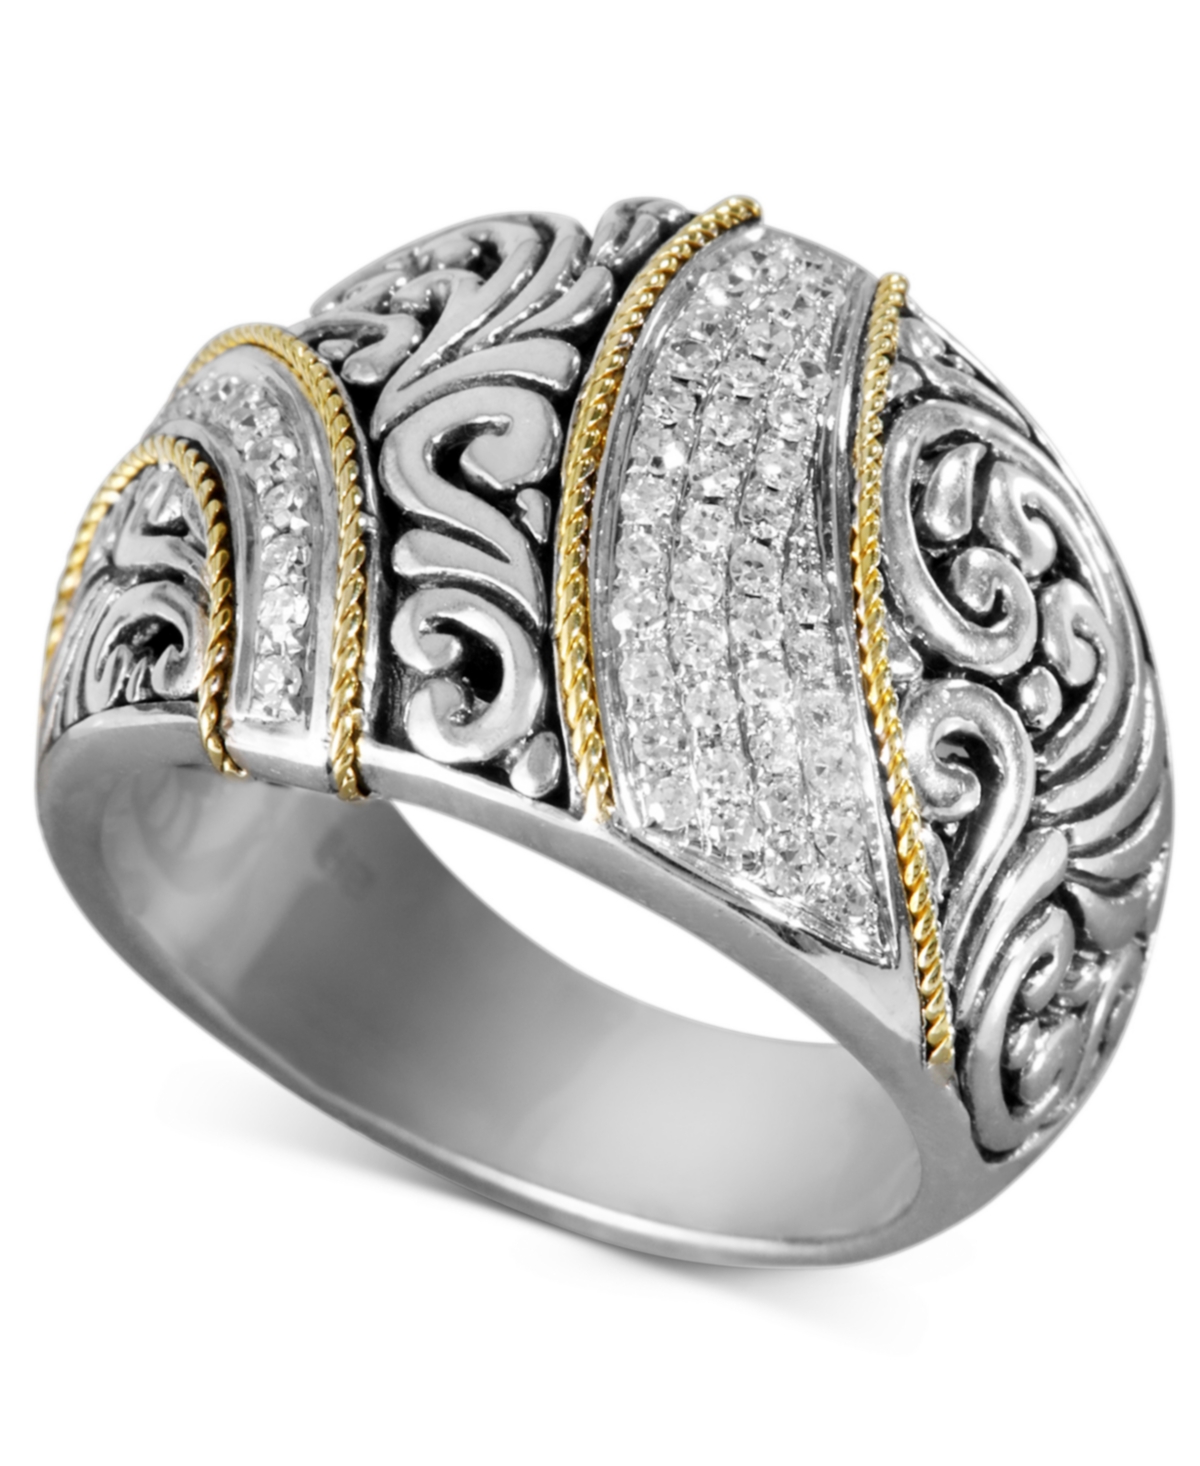 Balissima by Effy Diamond Ribbon Statement Ring (1/4 ct. t.w.) in 18k Gold and Sterling Silver - Sterling Silver/Gold